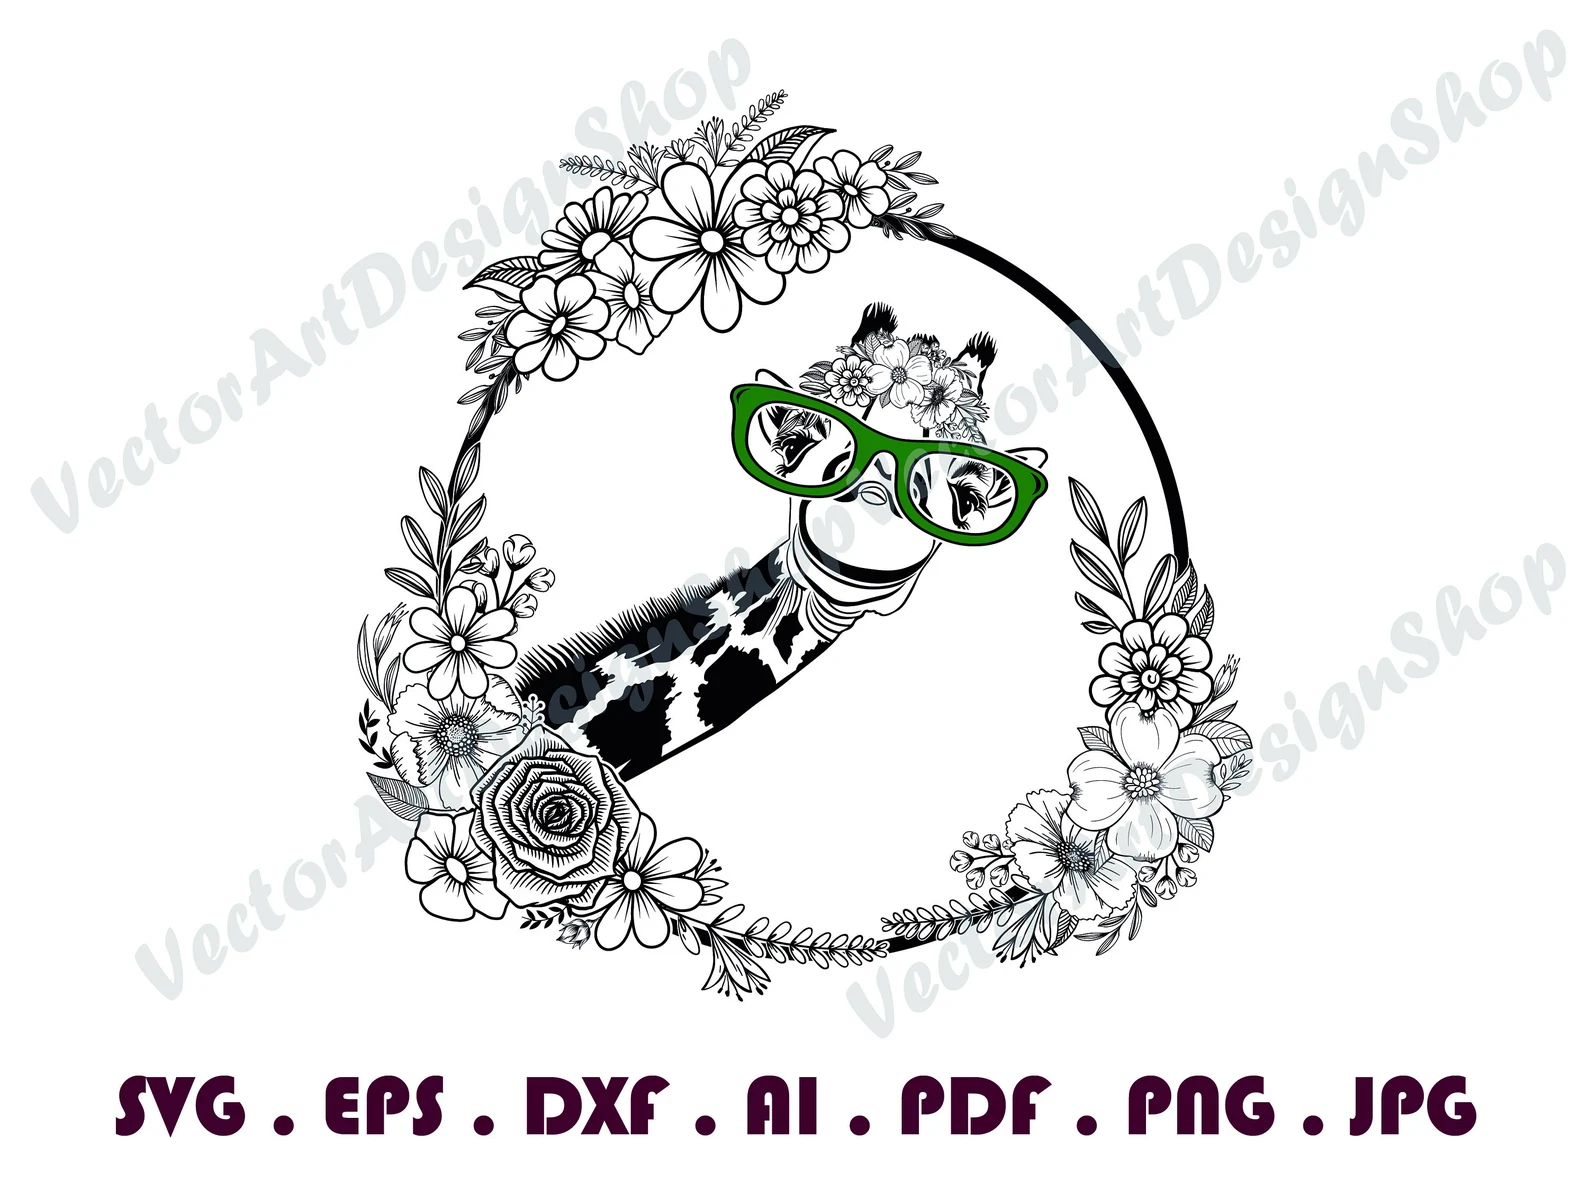 Giraffe wearing glasses and a wreath of flowers.